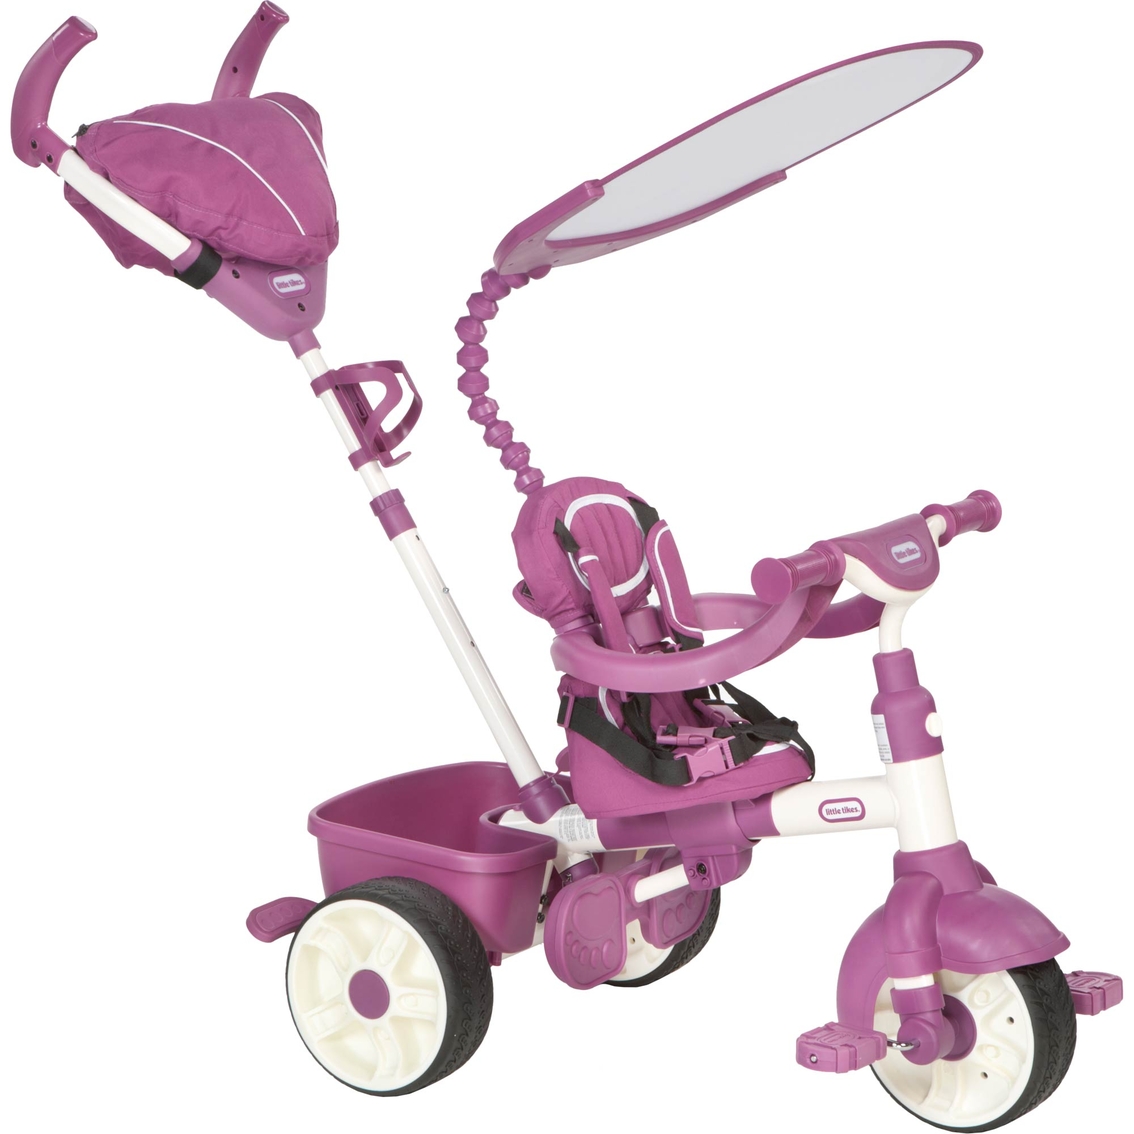 Little Tikes 4 in 1 Sports Edition Trike, Pink - Image 2 of 4